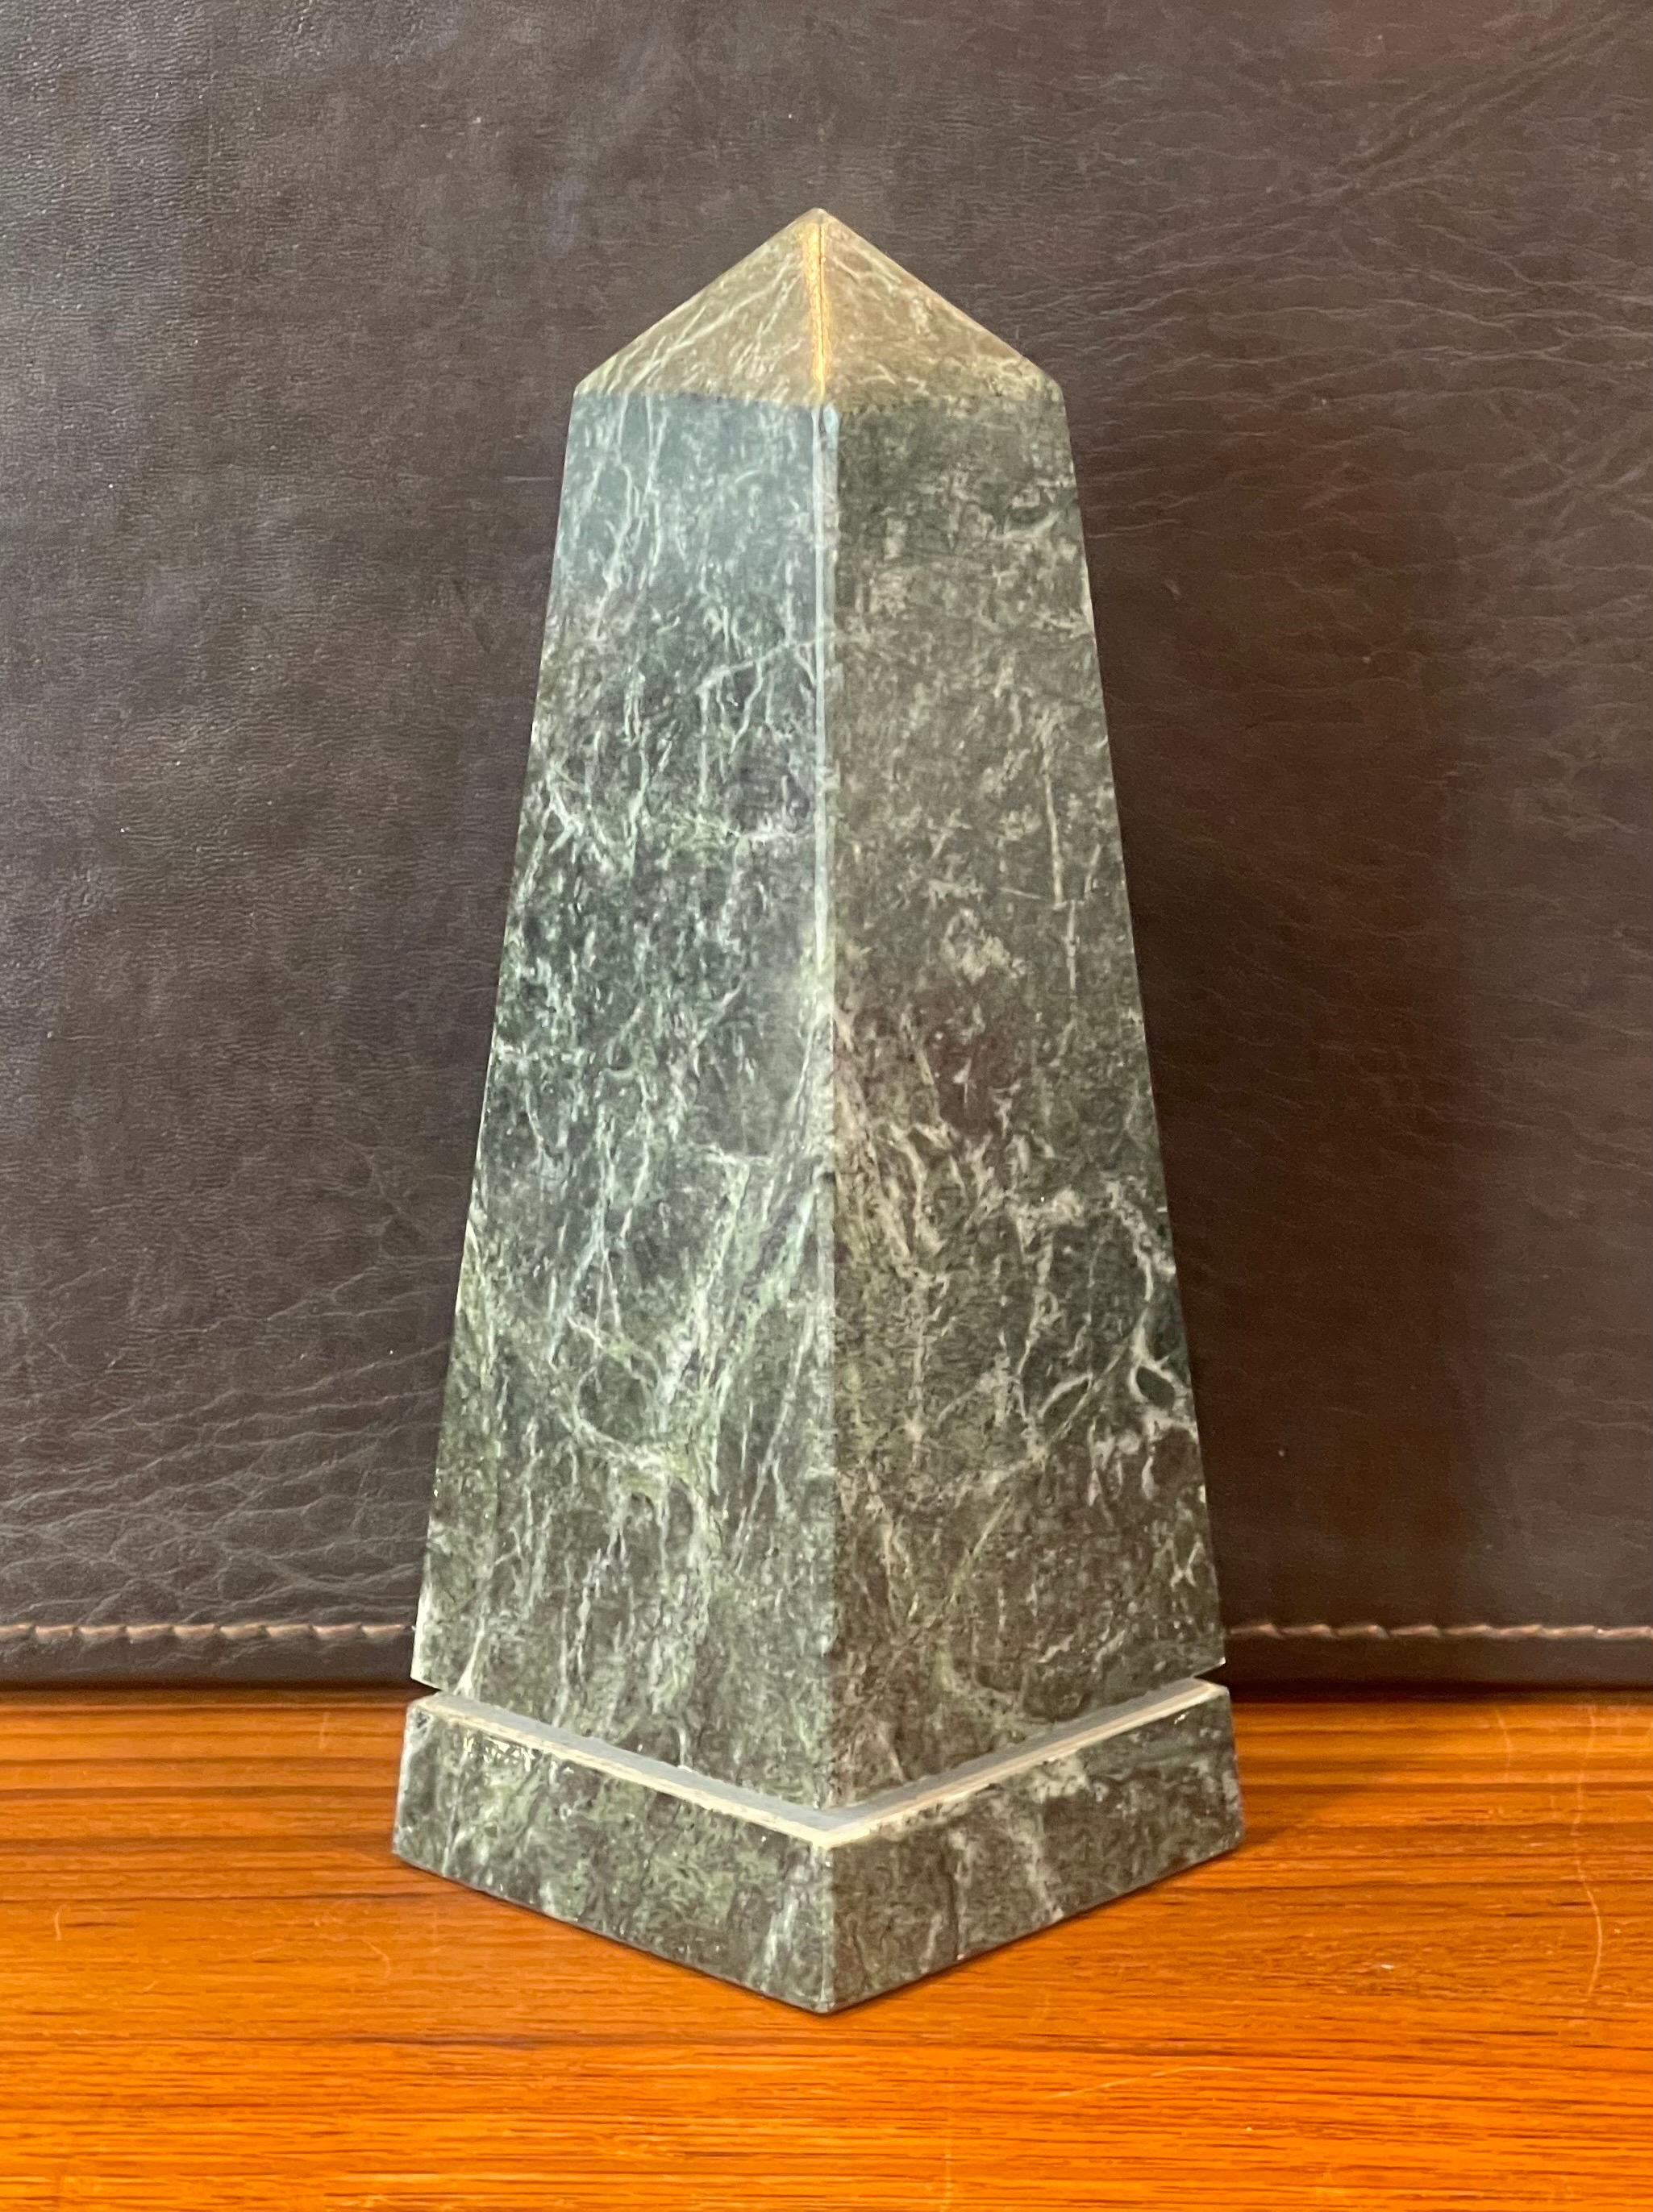 Beautiful solid green marble decorative obelisk, circa 1970s. The piece is in very good vintage condition with no chips or cracks and is nicely polished. The piece is 2.75